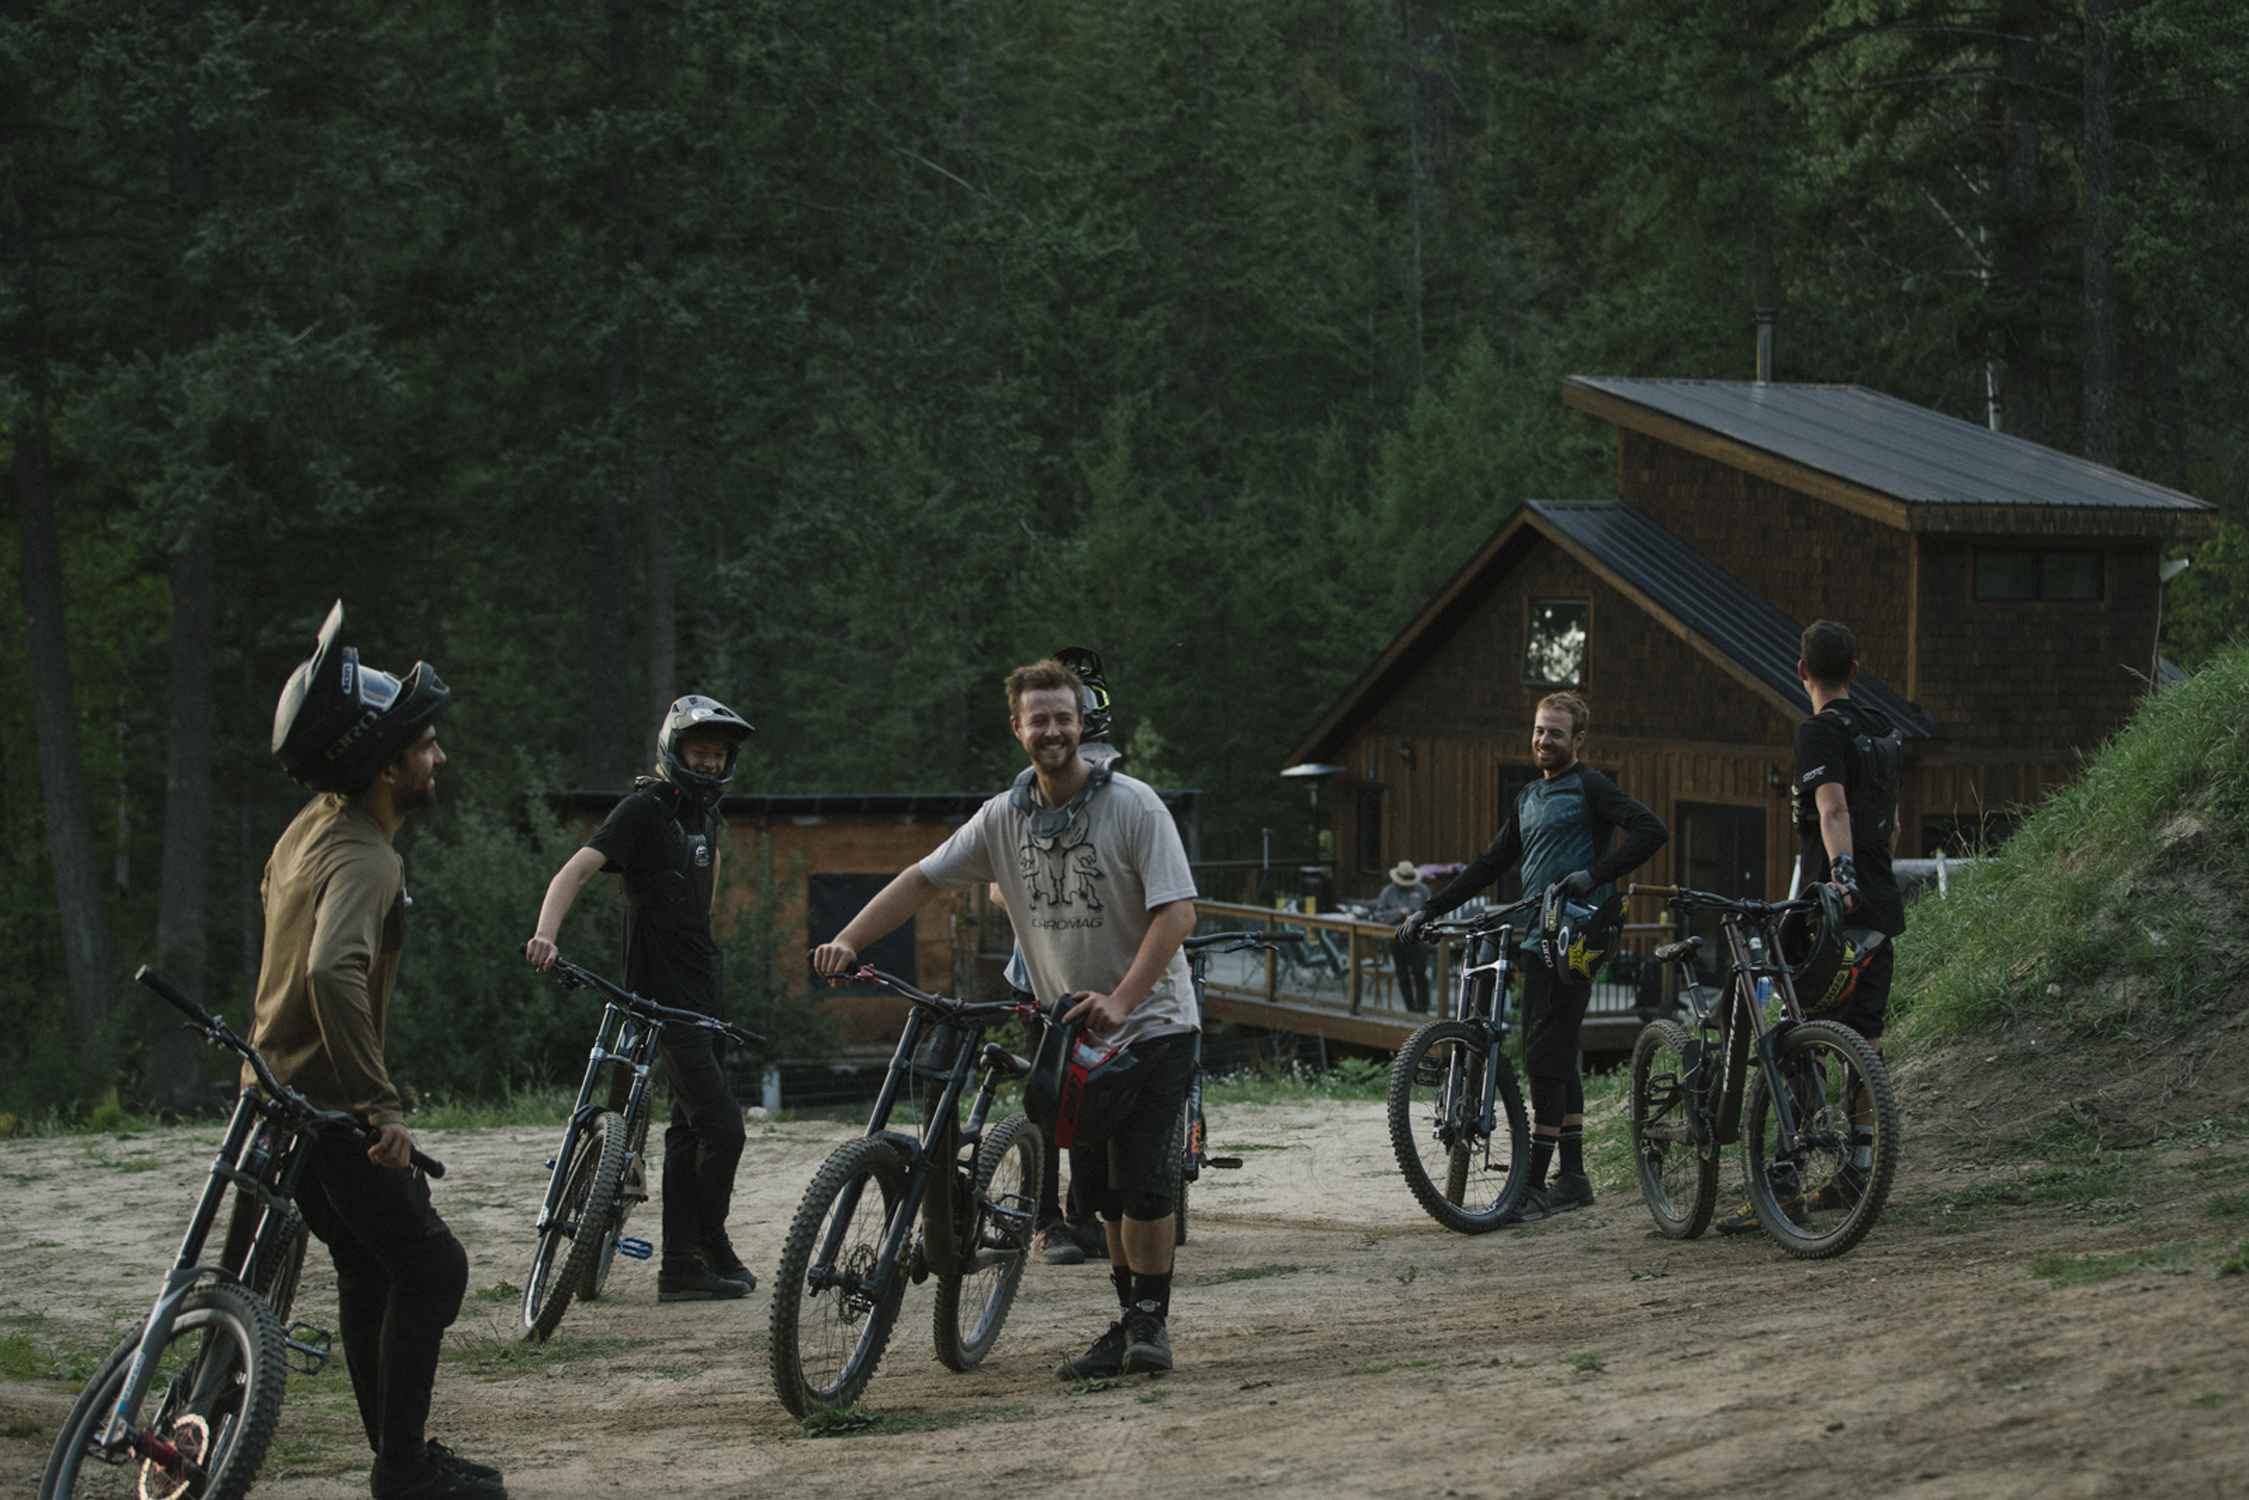 group of mountain bikers riding the jumps at Kurts house